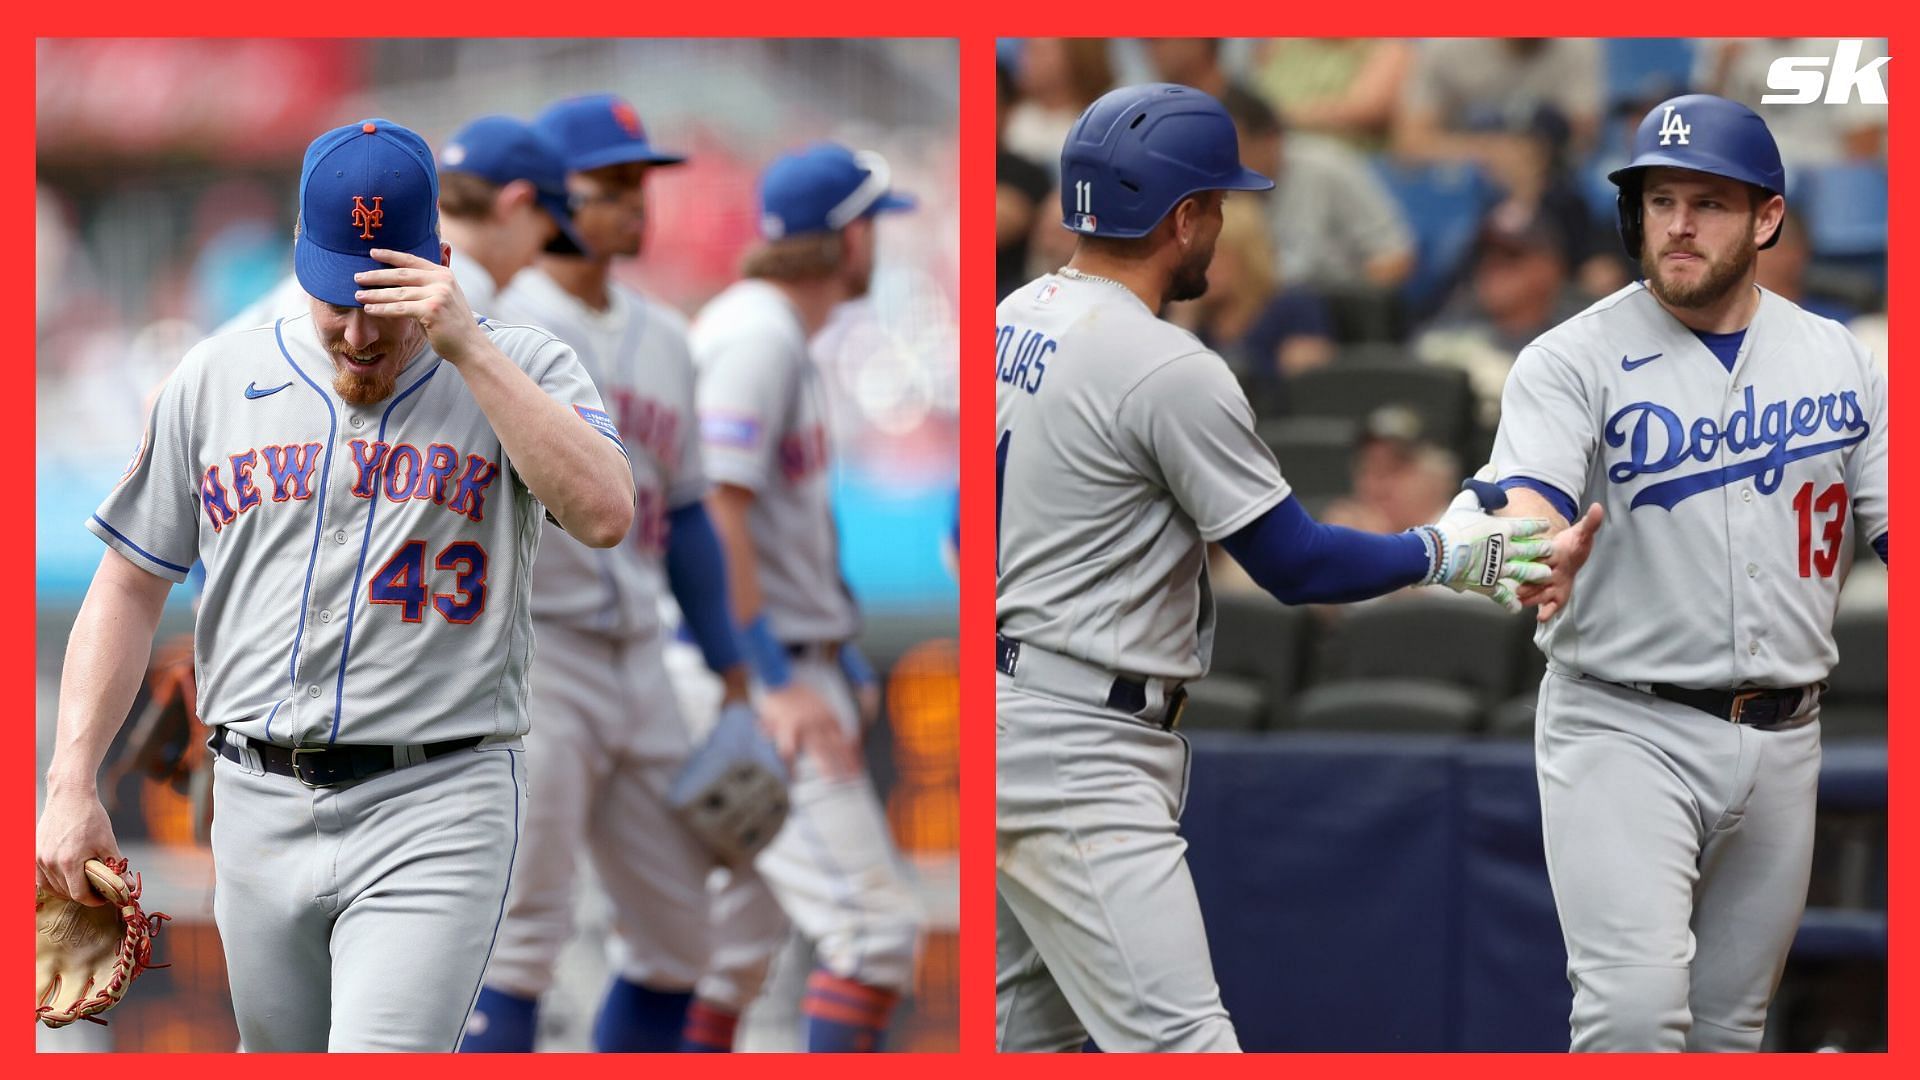 WATCH New York Mets fans erupt with boos after a horrific 8th inning by the team